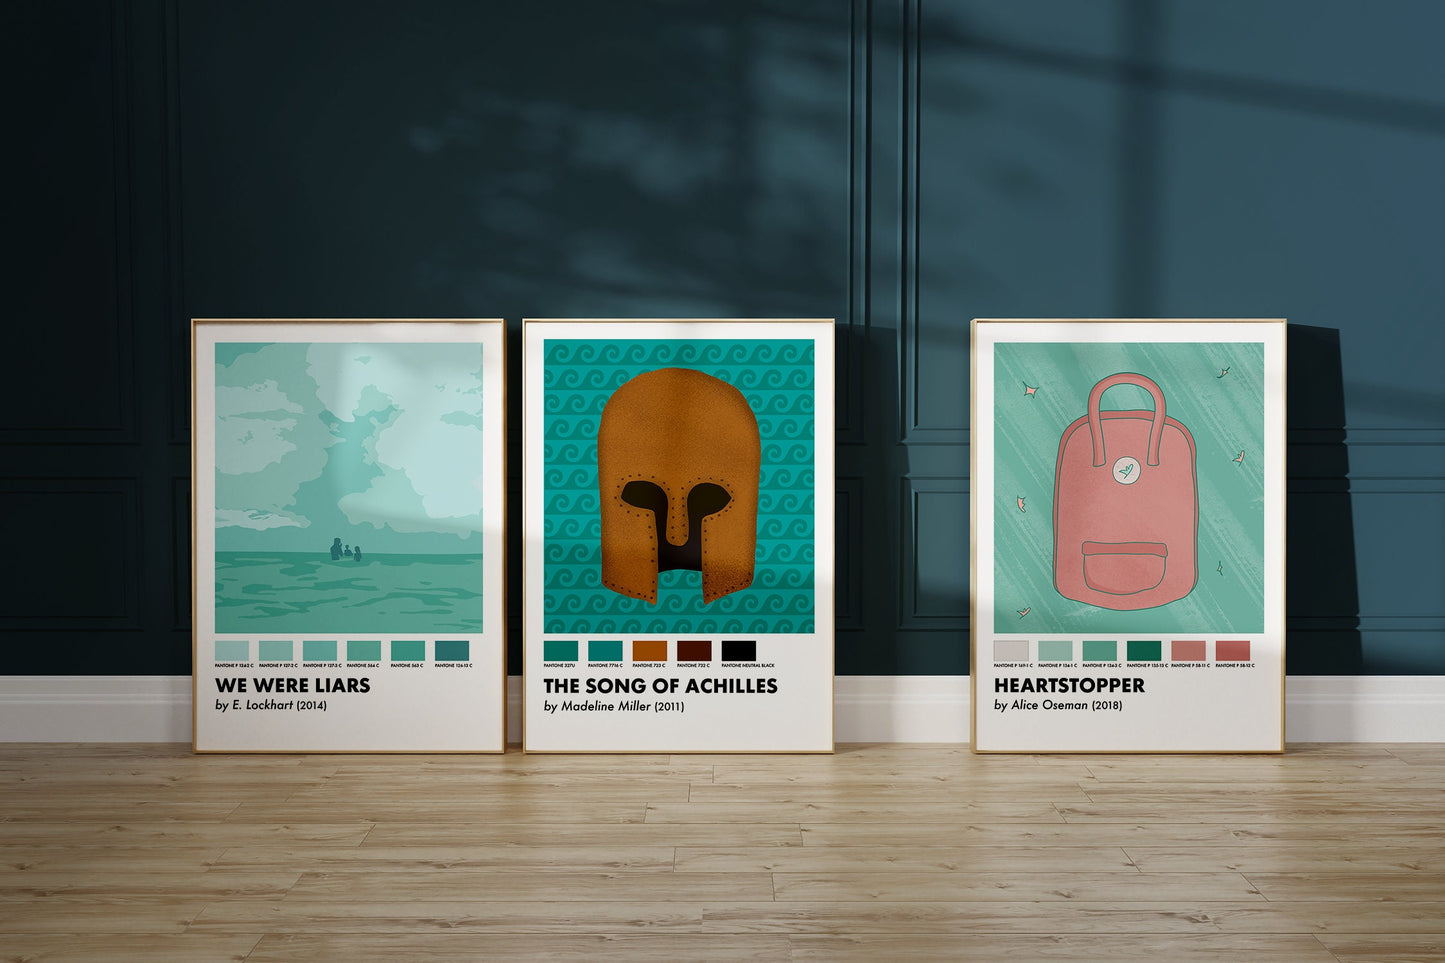 Heartstopper Inspired Art Print - The Pantone Collection